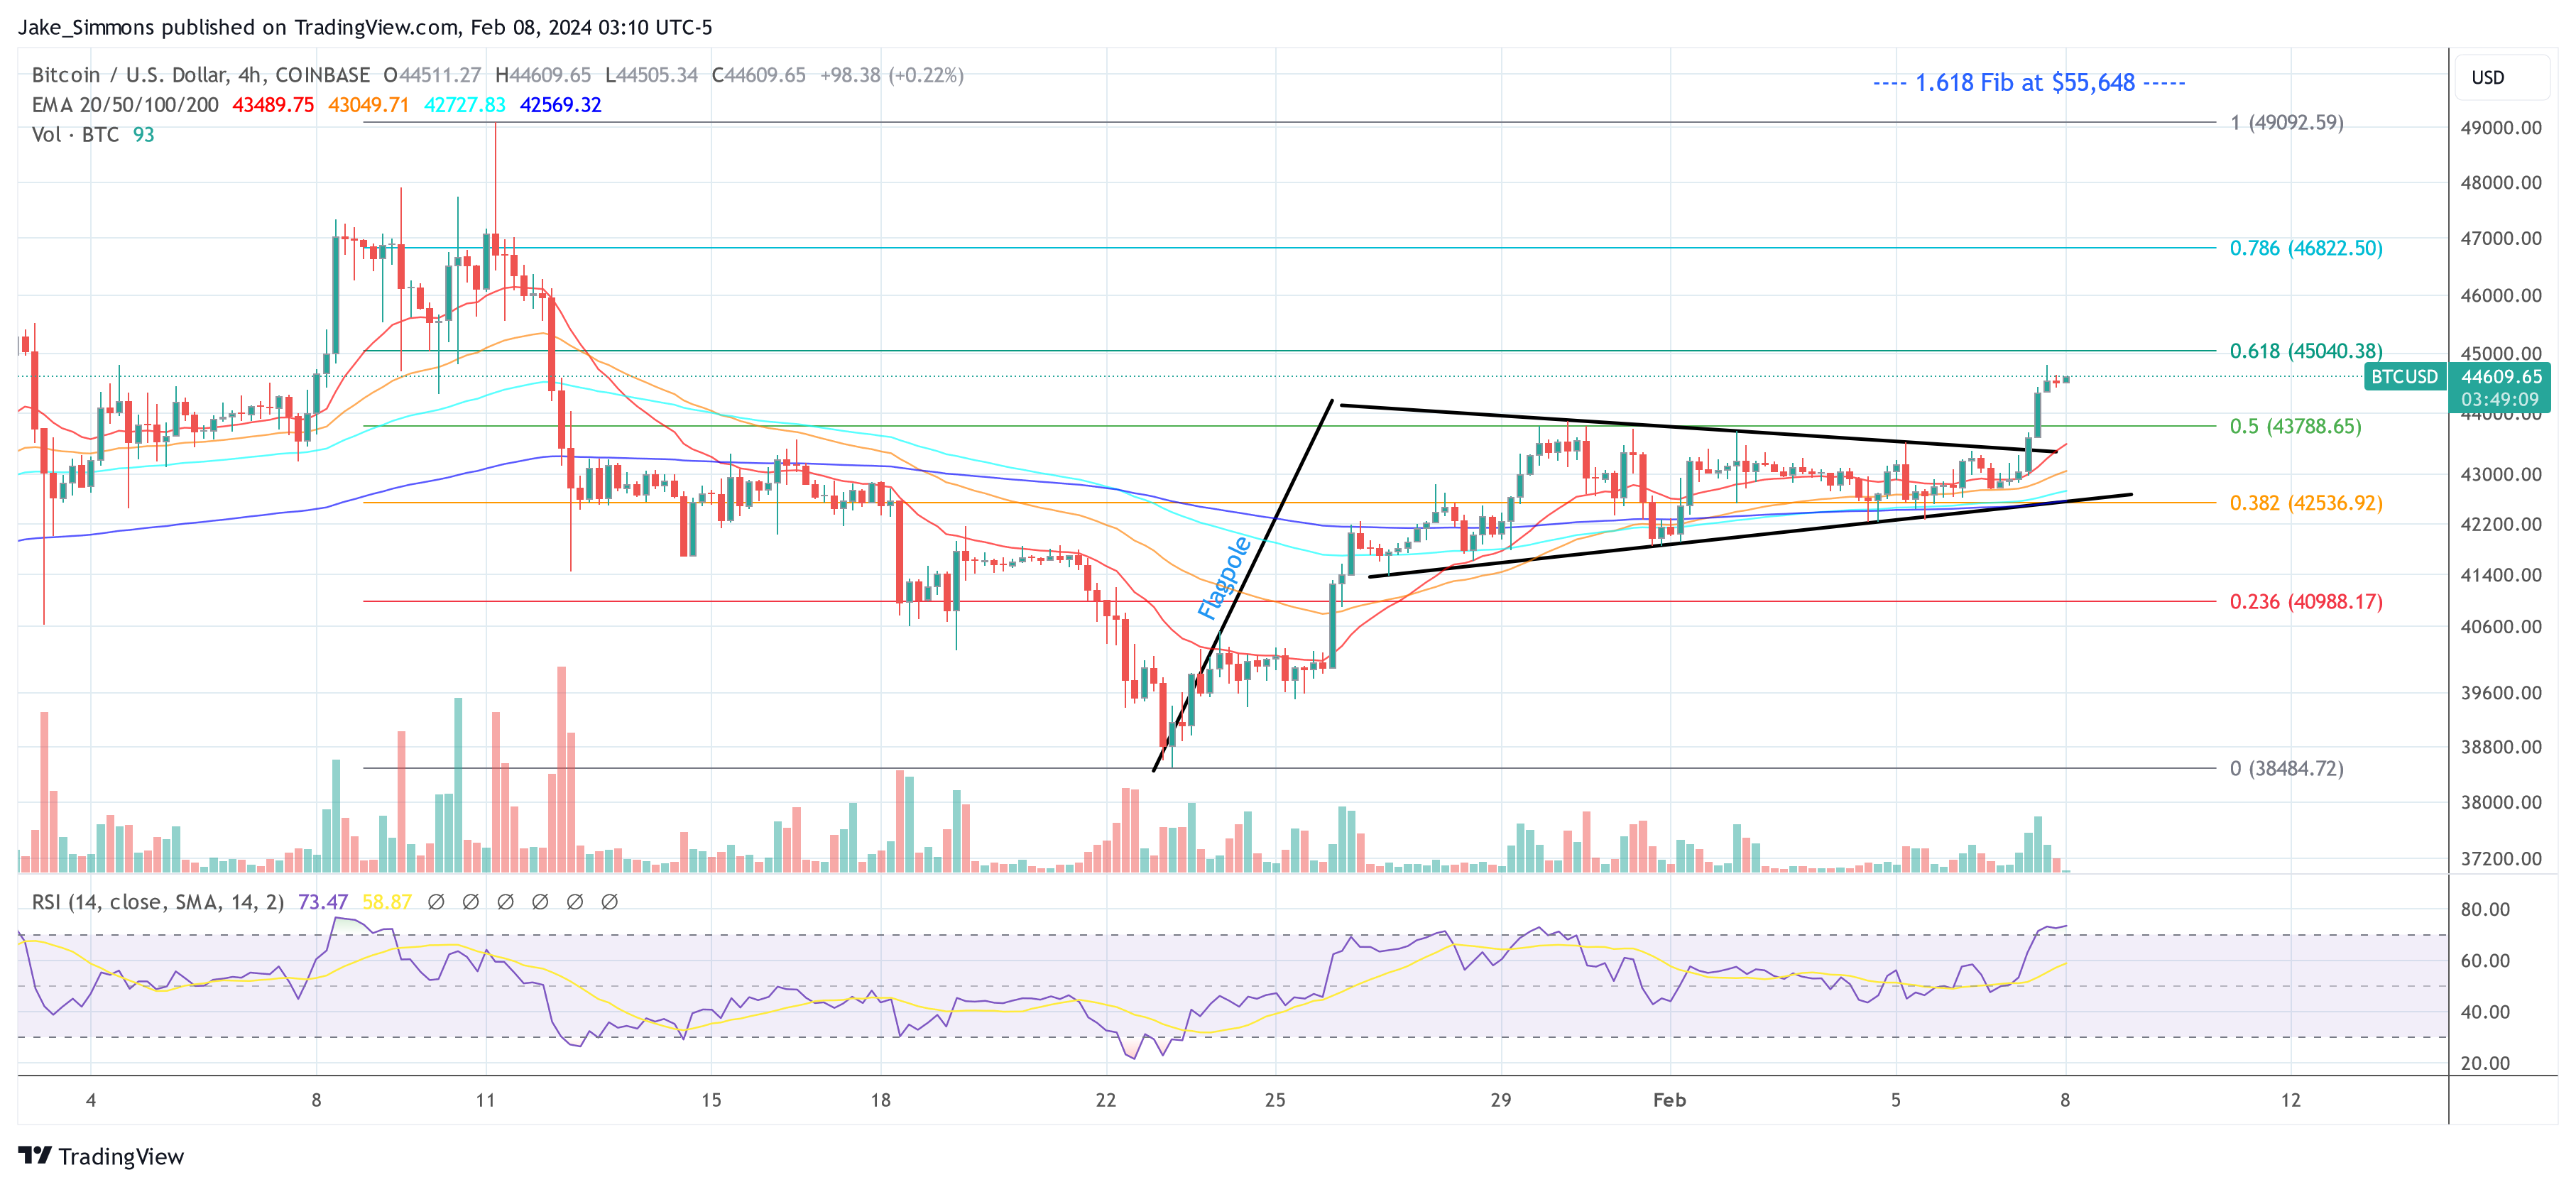 Bitcoin Price Targets $55,000 Following Bull Pennant Breakout